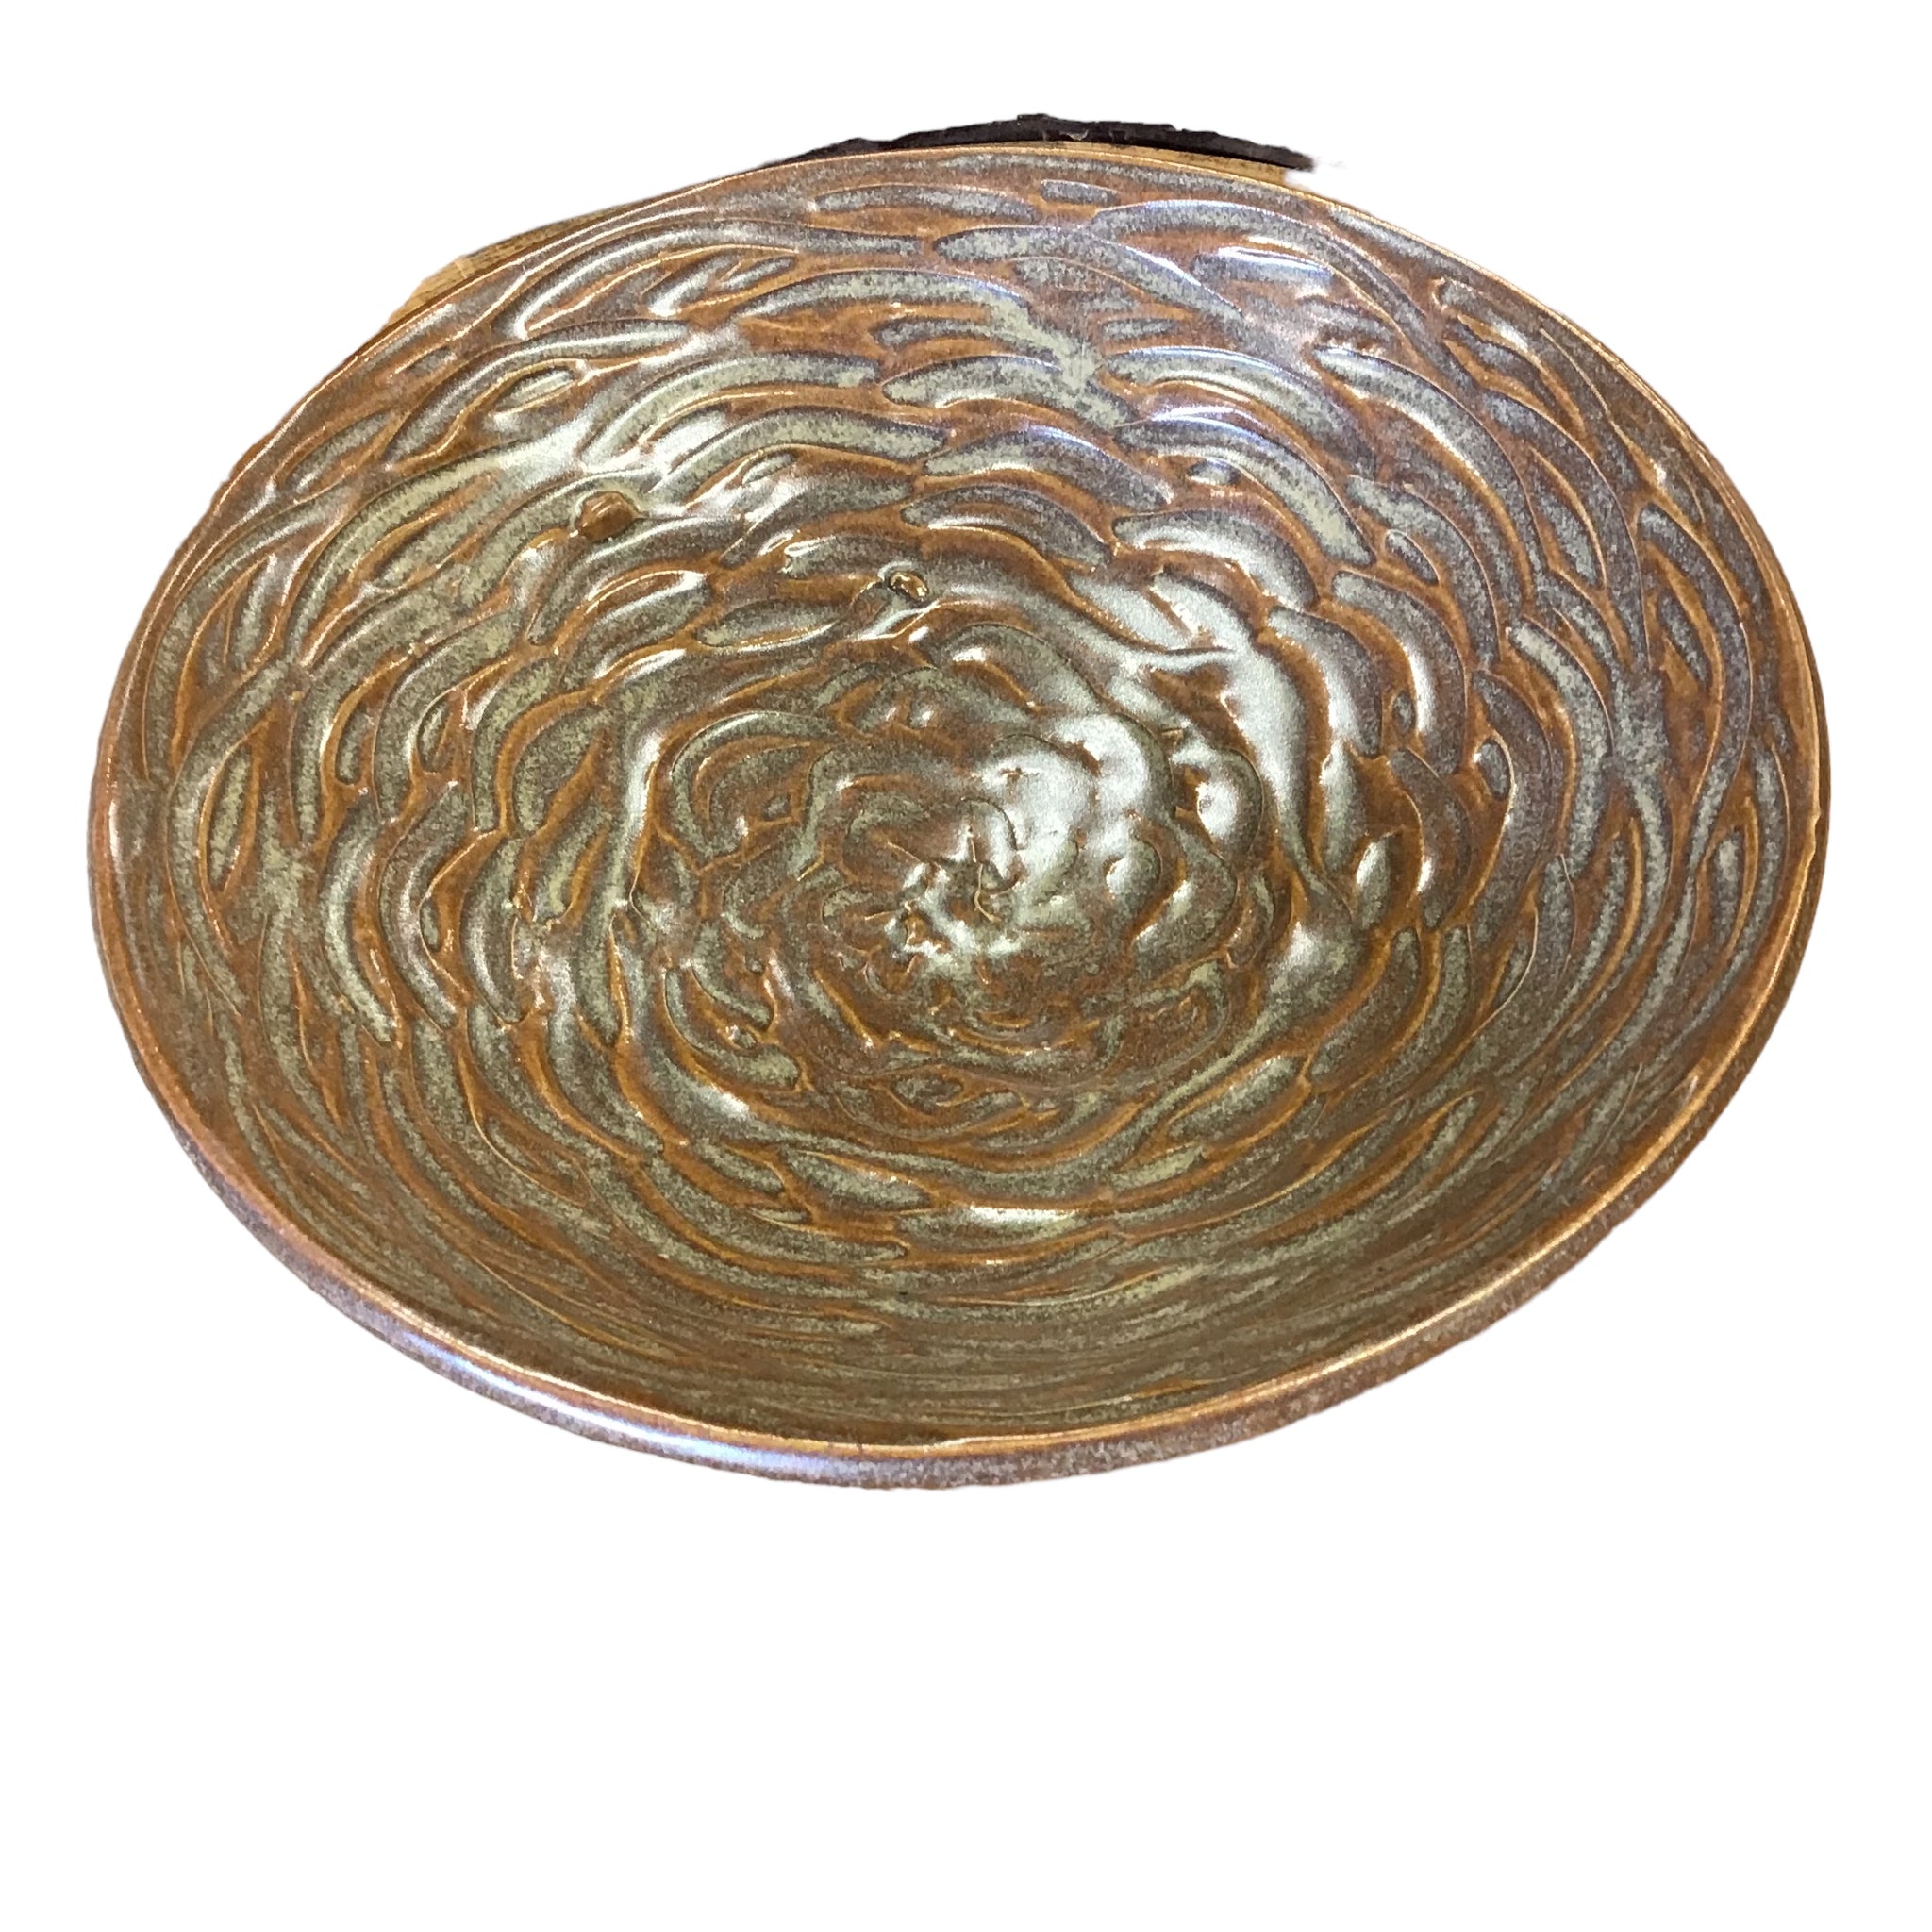 Pottery Bowl - brown with interior design